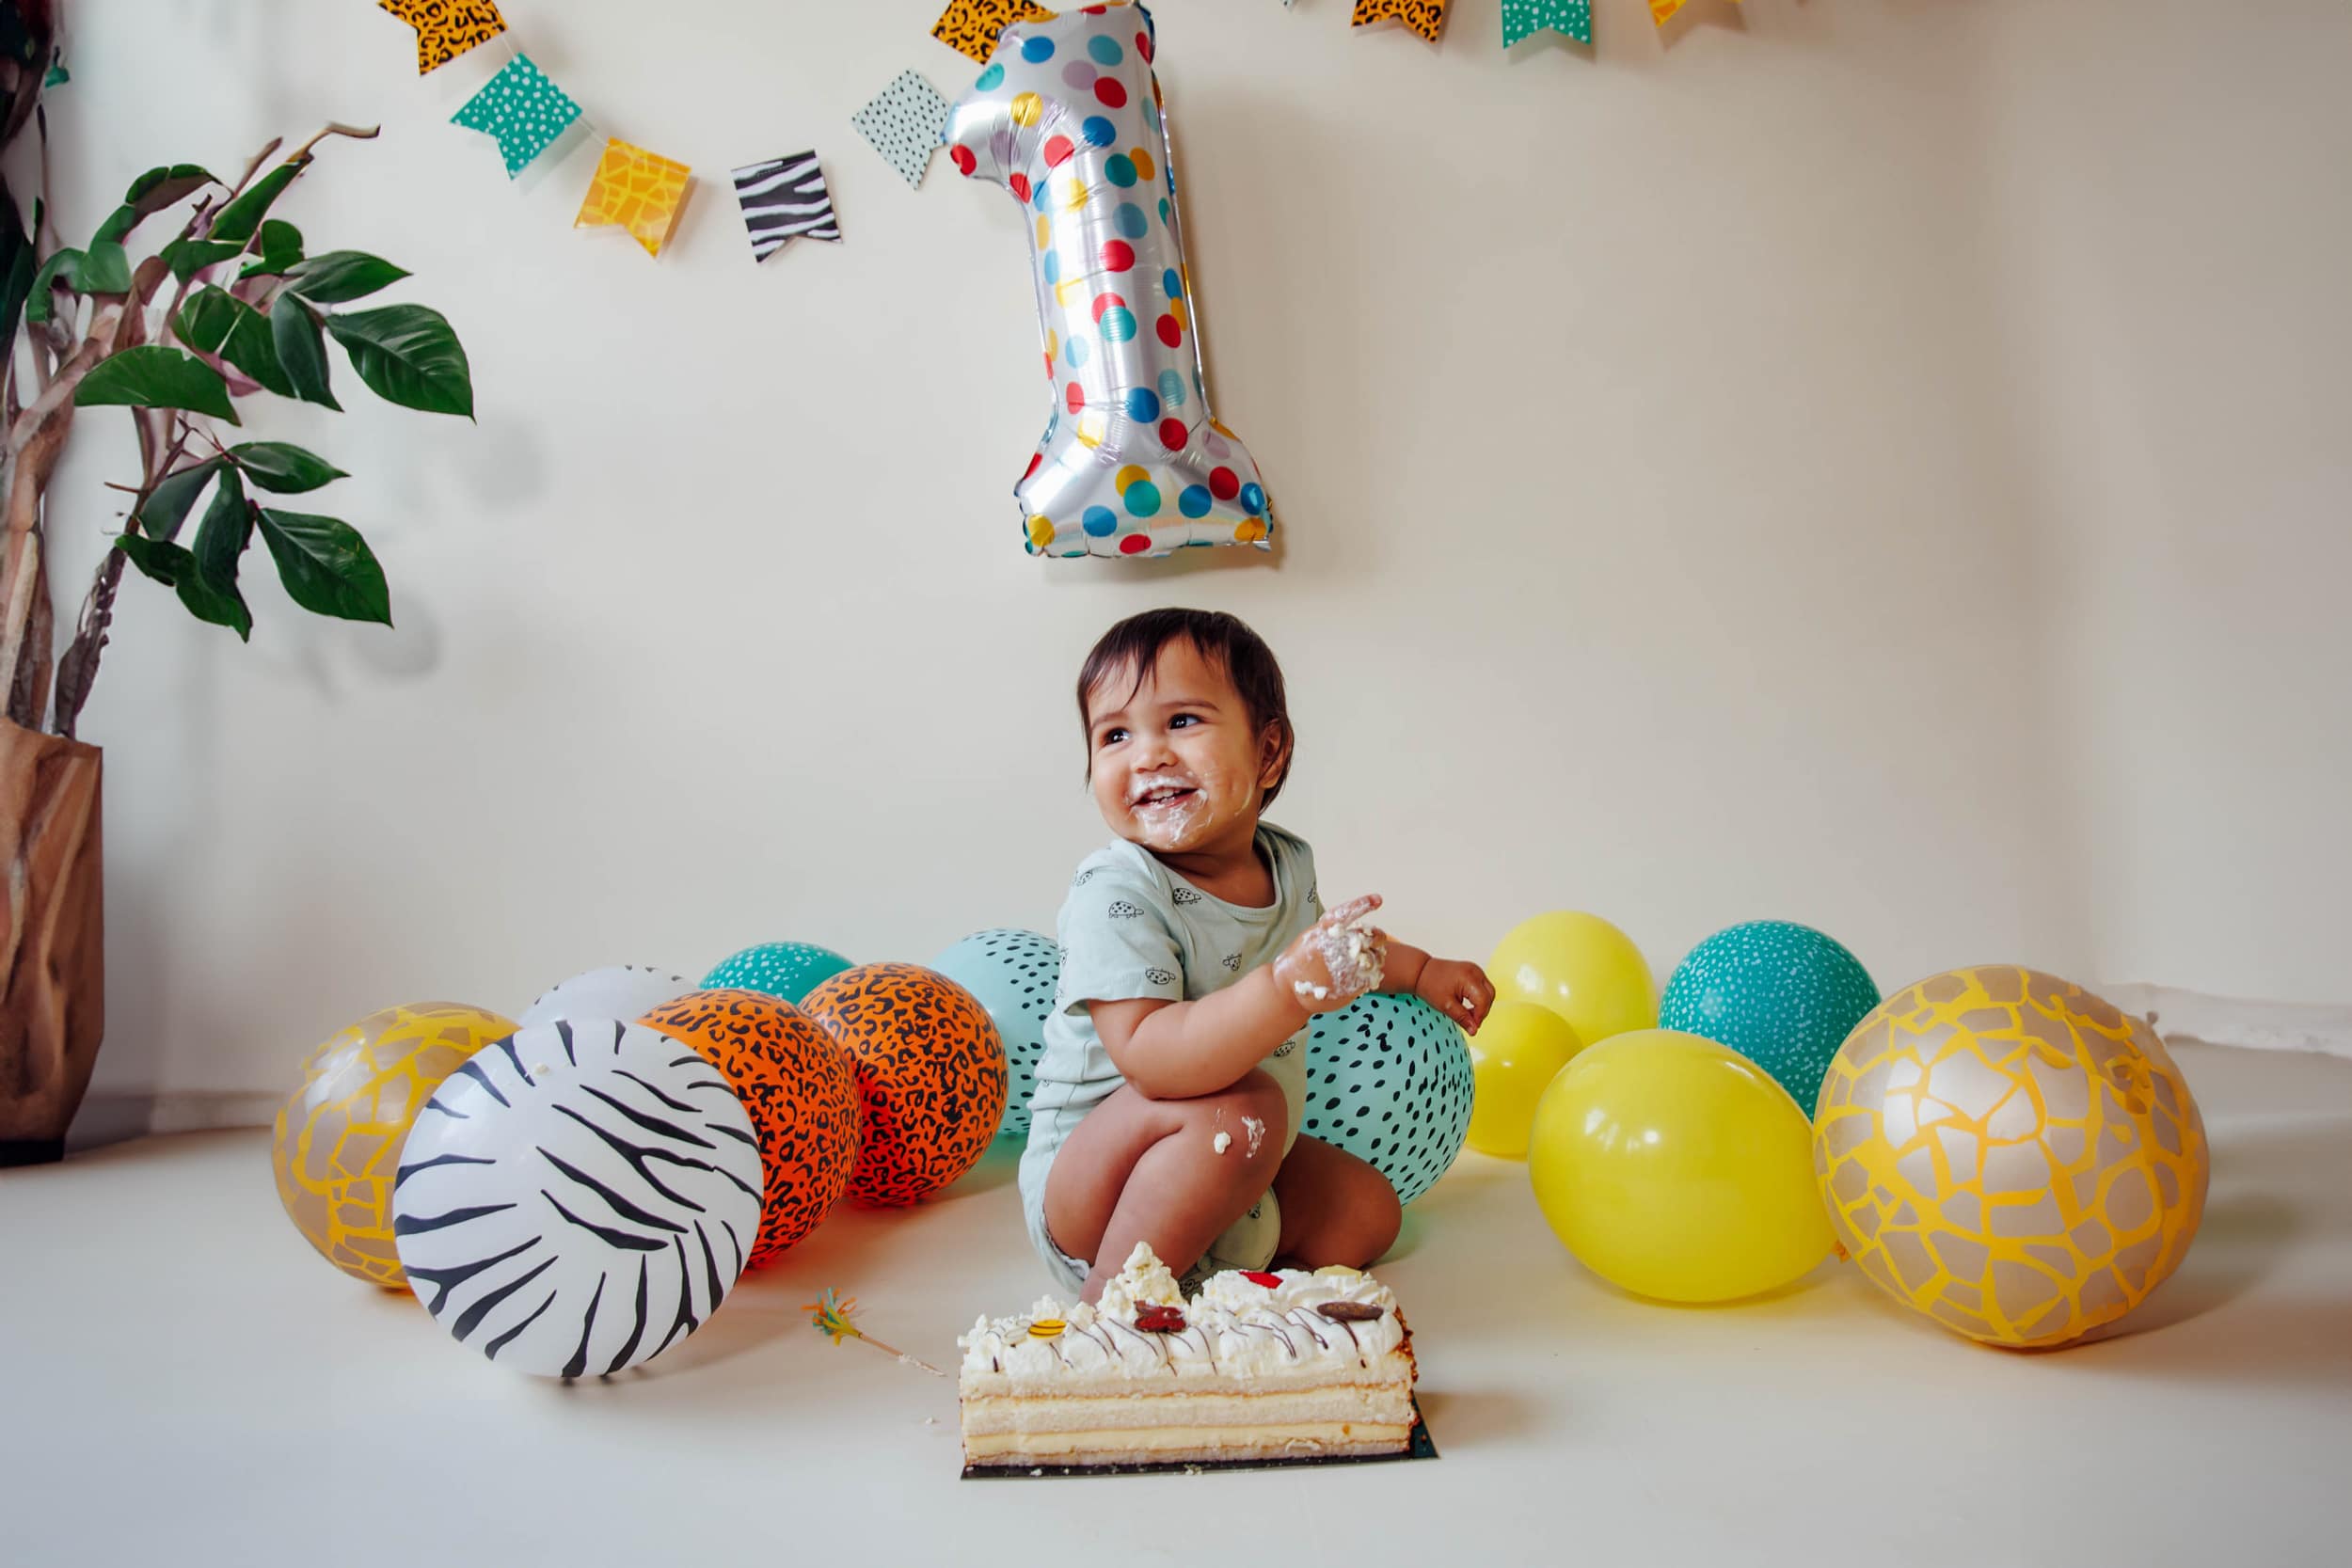 A toddler sits on the ground with a cake surrounded by colourful balloons and a large '1' balloon, indicating a first birthday. The child has cake on his face and hands.